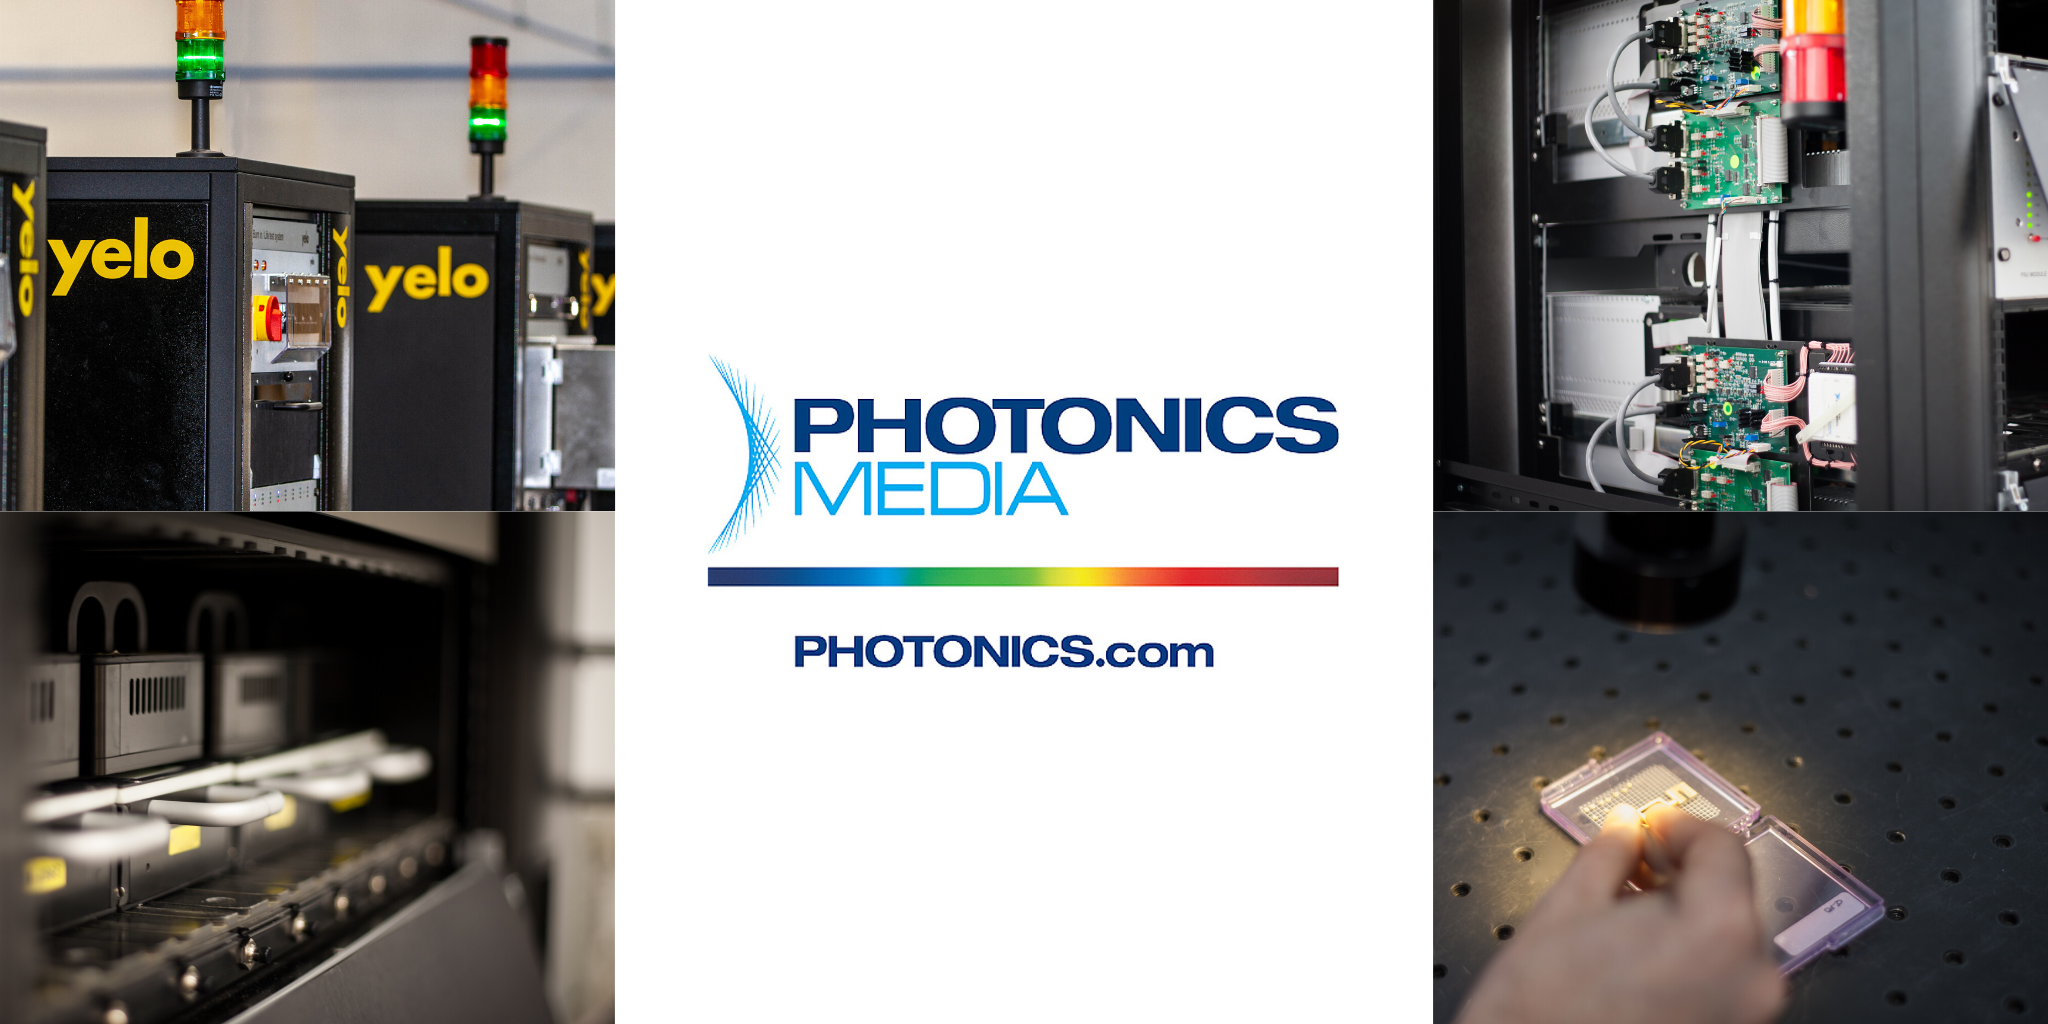 Yelo Extends Advertising Deal with Photonics Media